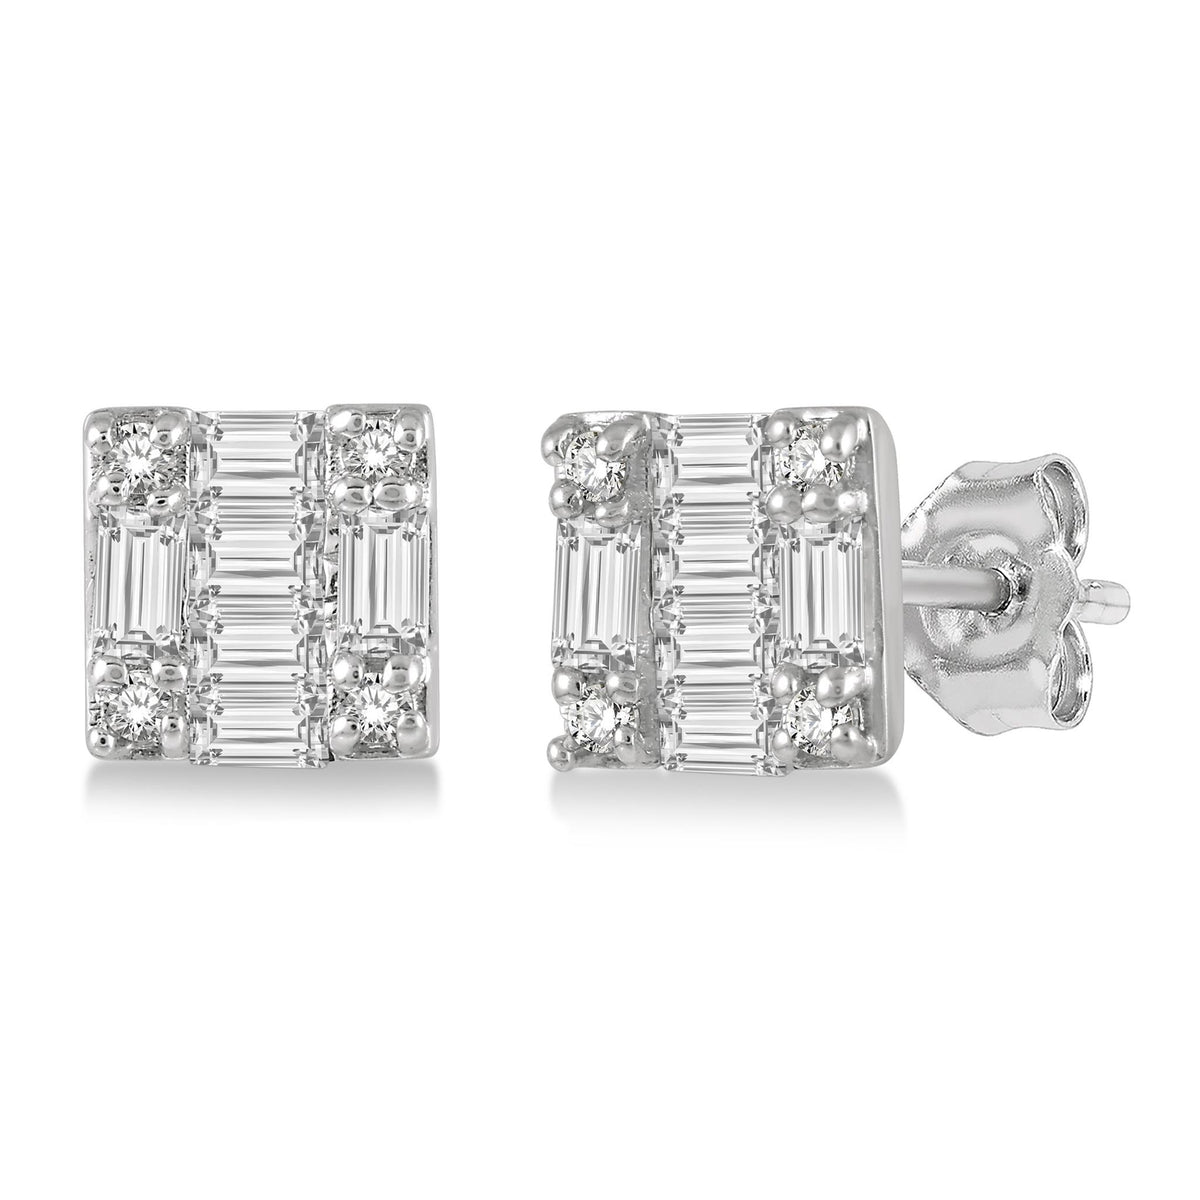 Lasker Petites-10Kt White Gold Square Shaped Stud Earrings with .15cttw Natural Diamonds